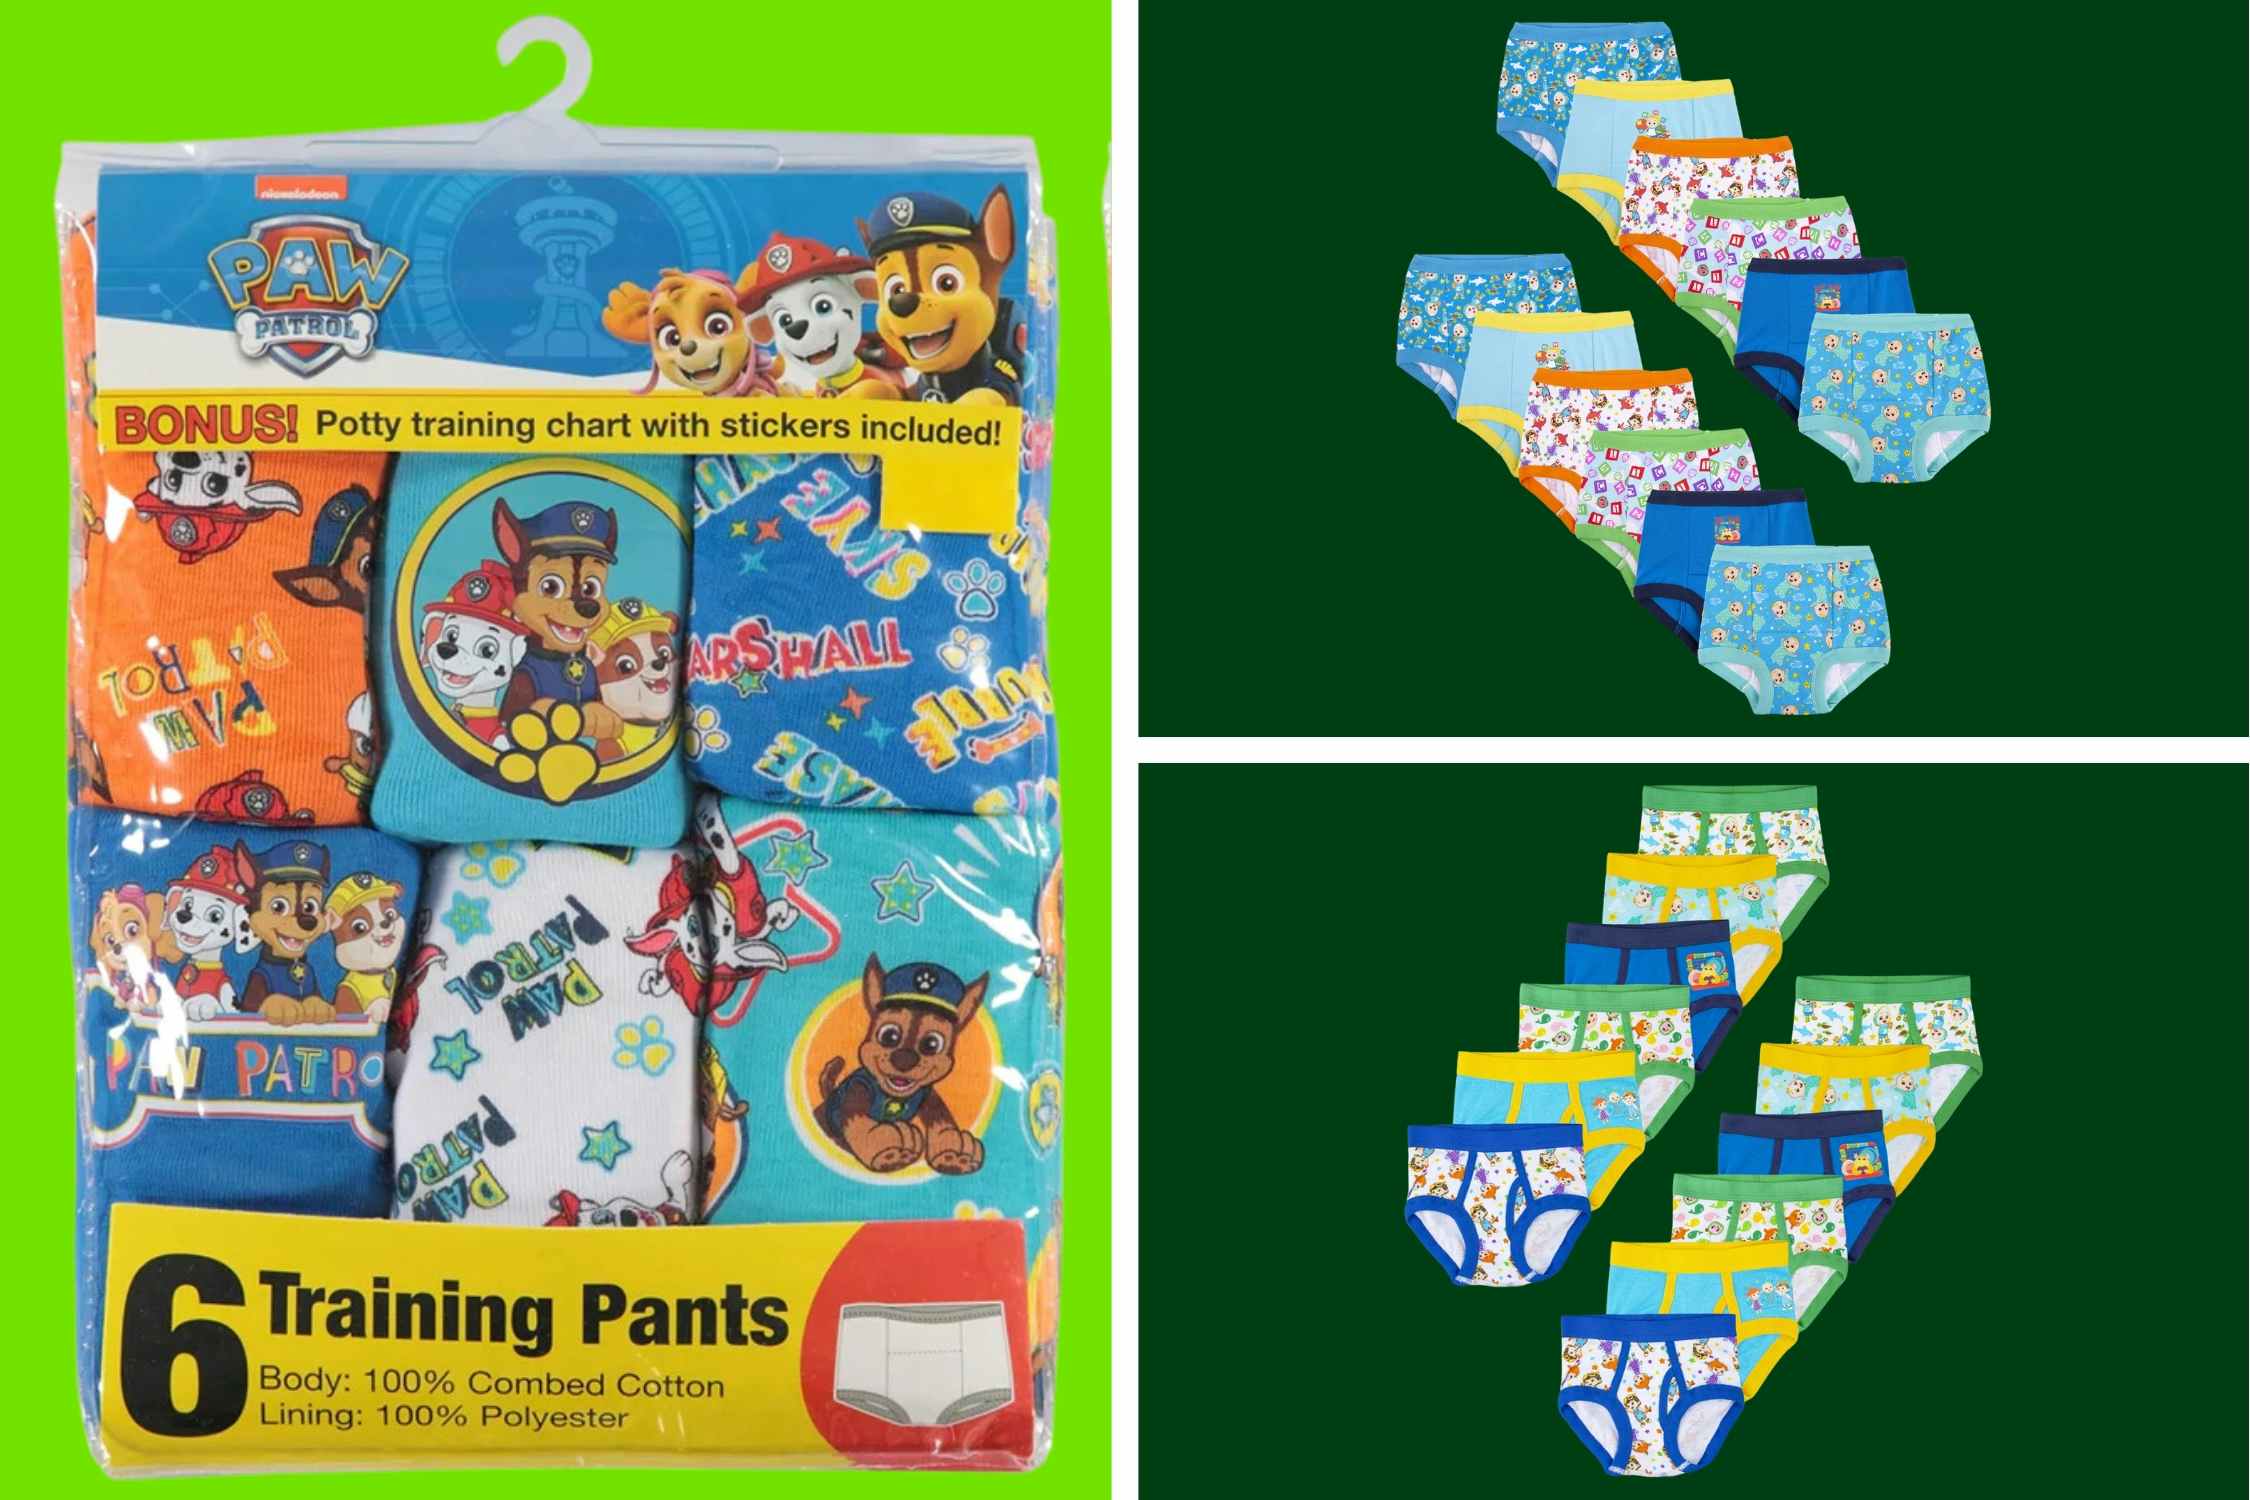 Paw Patrol and CoComelon Toddler Underwear 12-Packs, $7 at Walmart